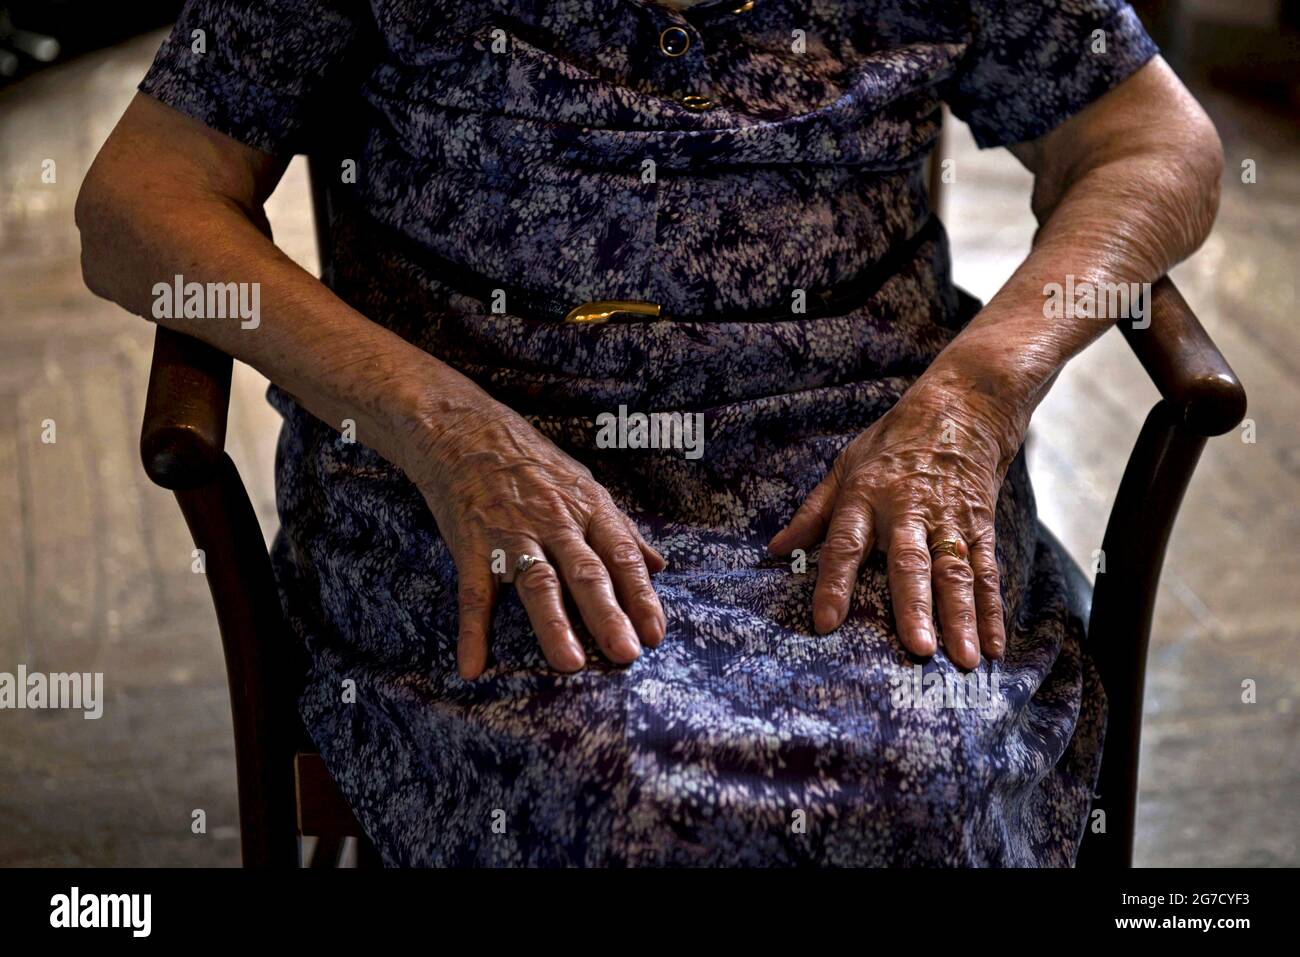 Mrs. Carla,100 years old at the private retirement home, in Lentate sul Seveso, Milan, Italy. Stock Photo